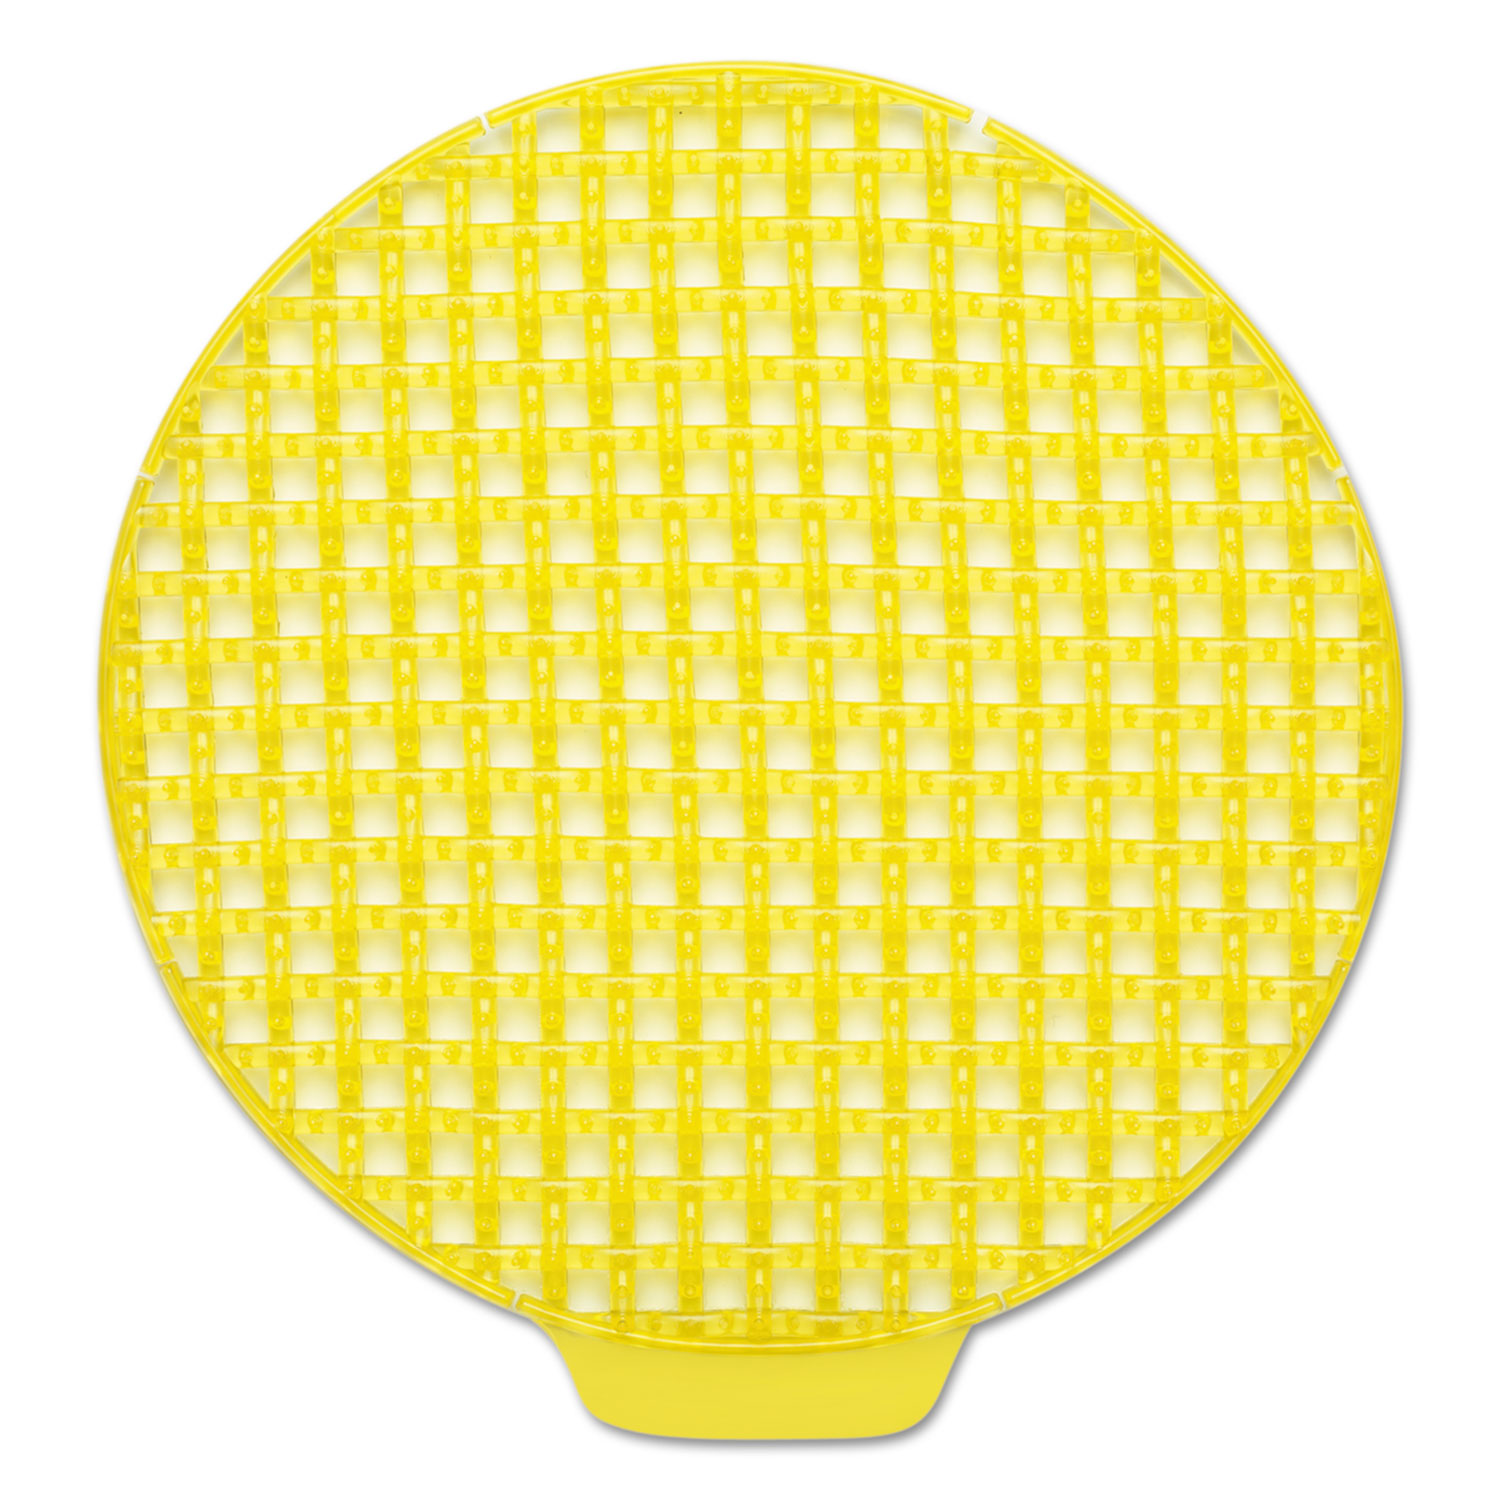 ActiveAire Deodorizer Urinal Screen, Sunscape, w/Side Tab, Yellow, 12/Ctn